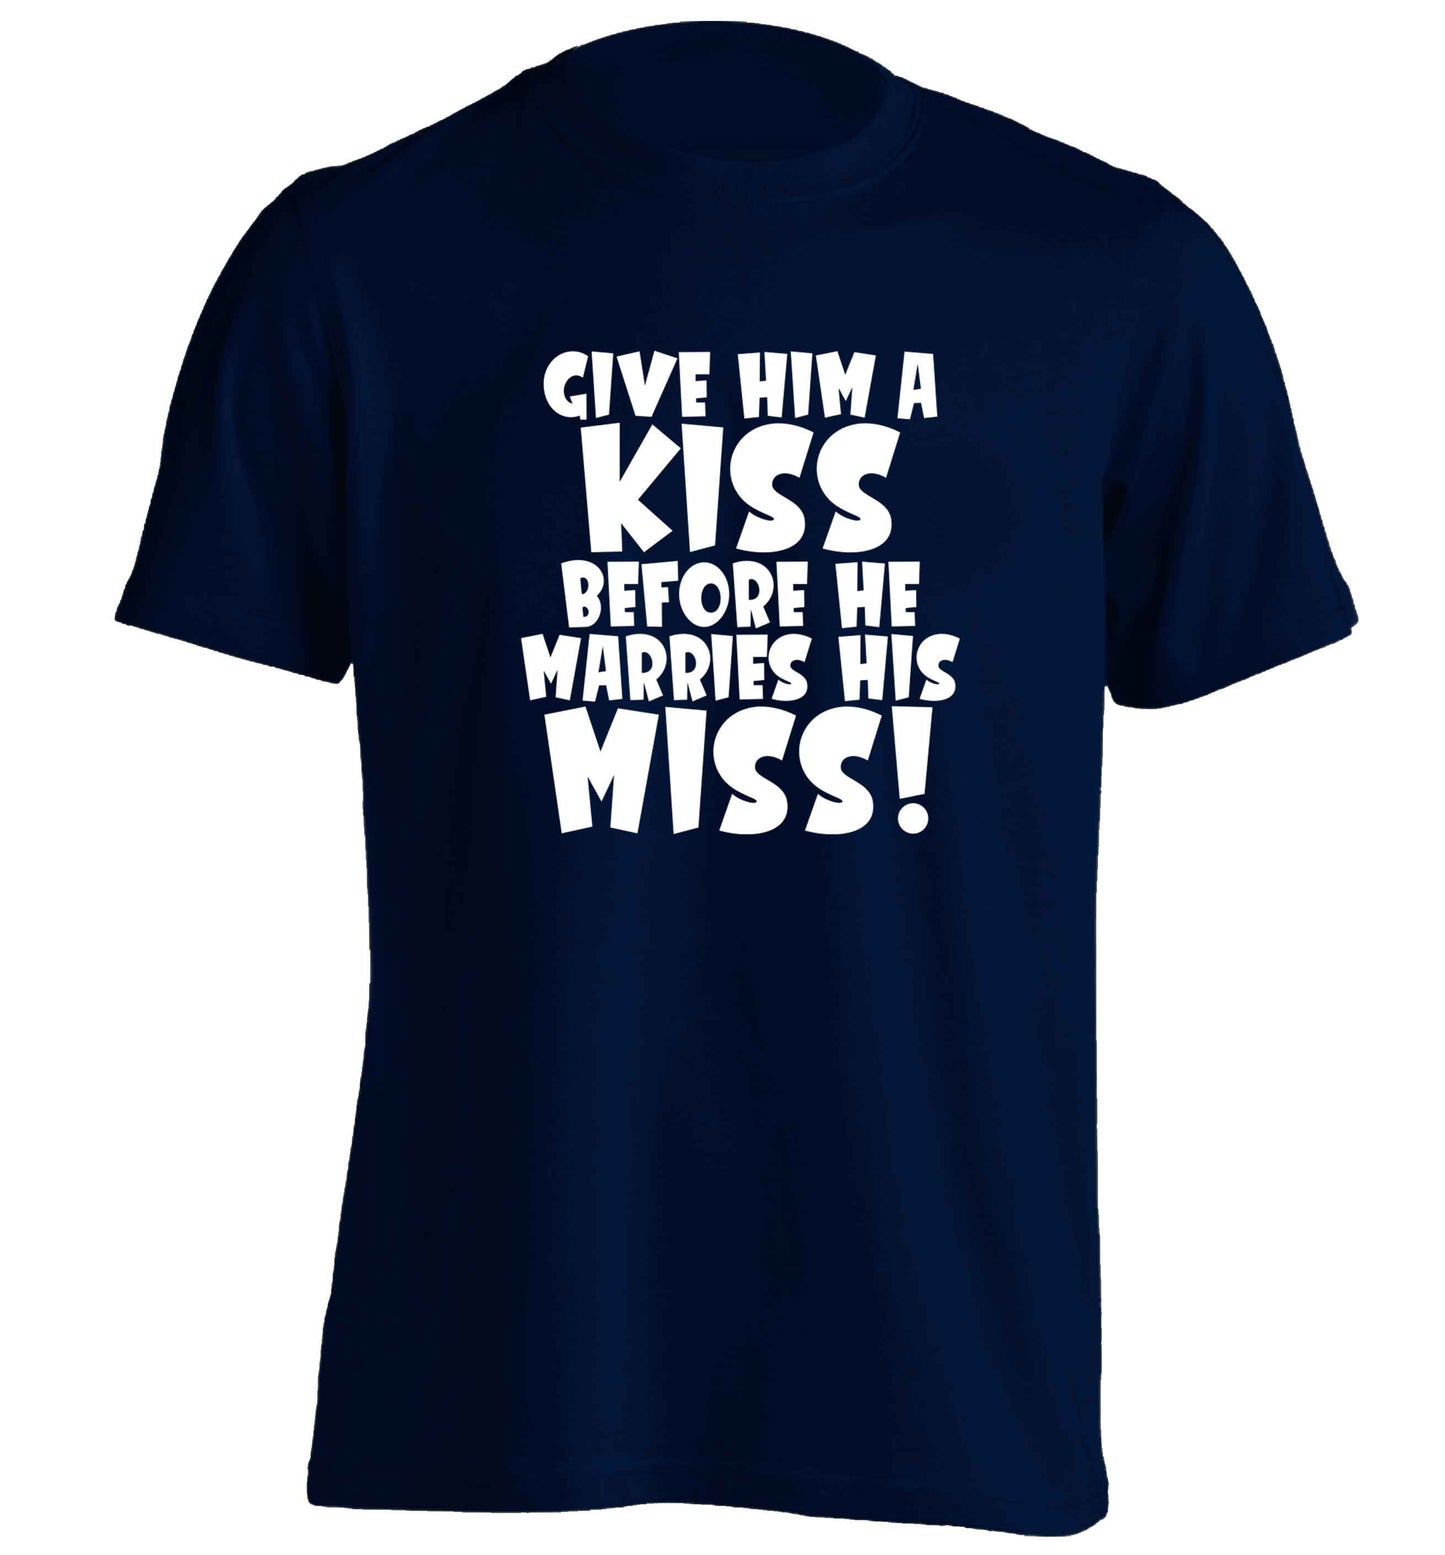 Give him a kiss before he marries his miss adults unisex navy Tshirt 2XL